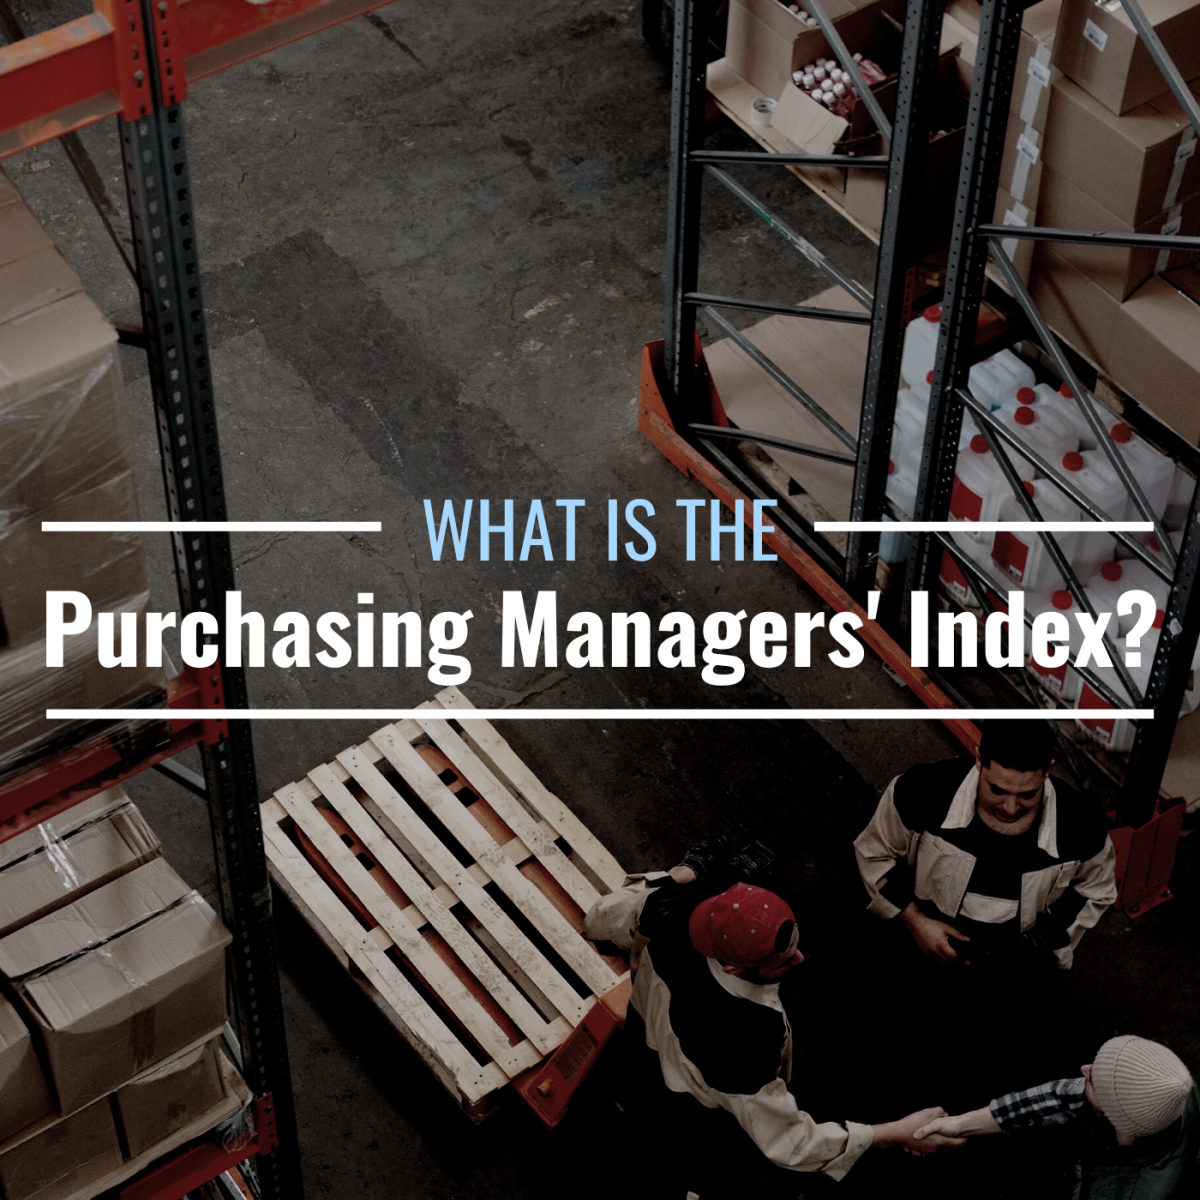 Photo of workers in a warehouse with text overlay that reads "What Is the Purchasing Managers' Index?"